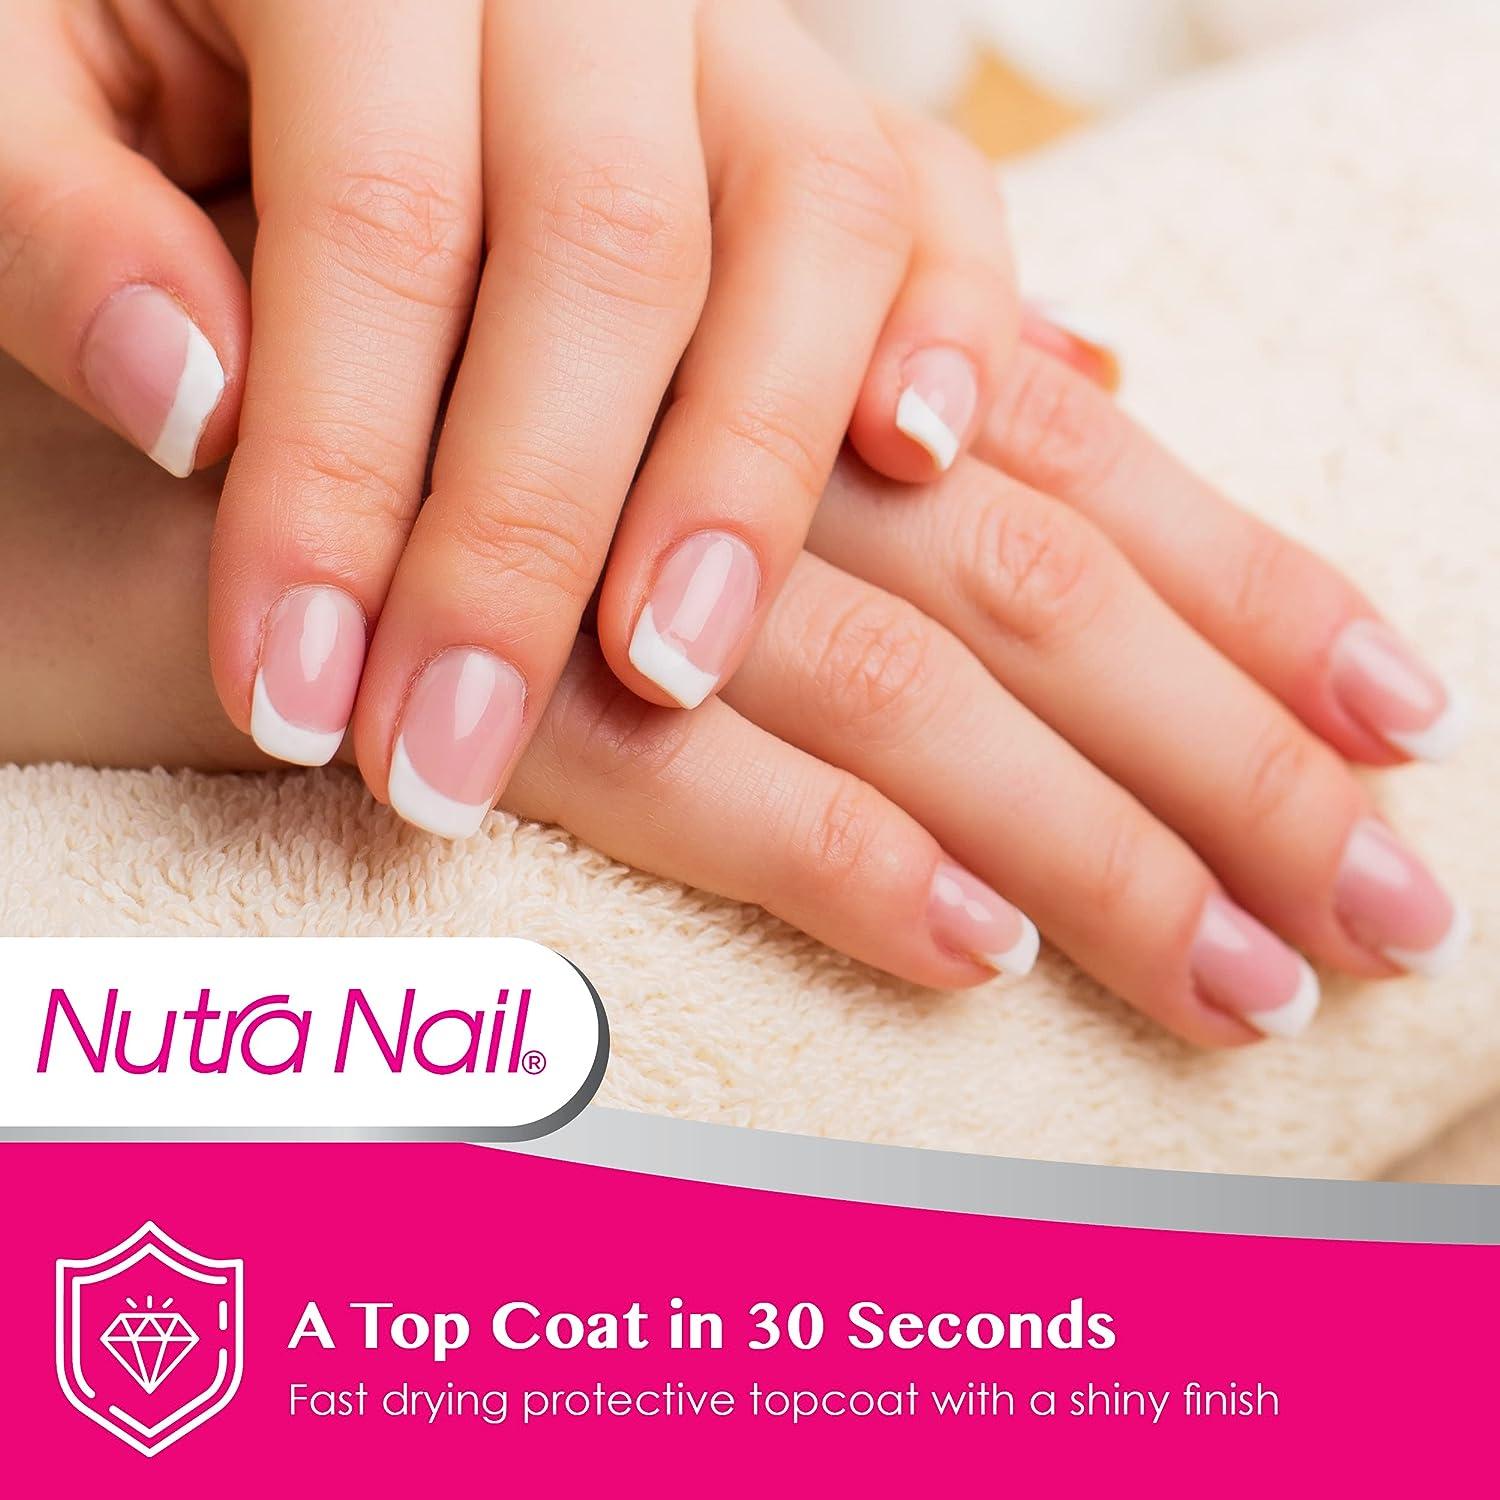 nutranail 5 to 7 Day Growth is an amazing nail growth product that gi... |  TikTok